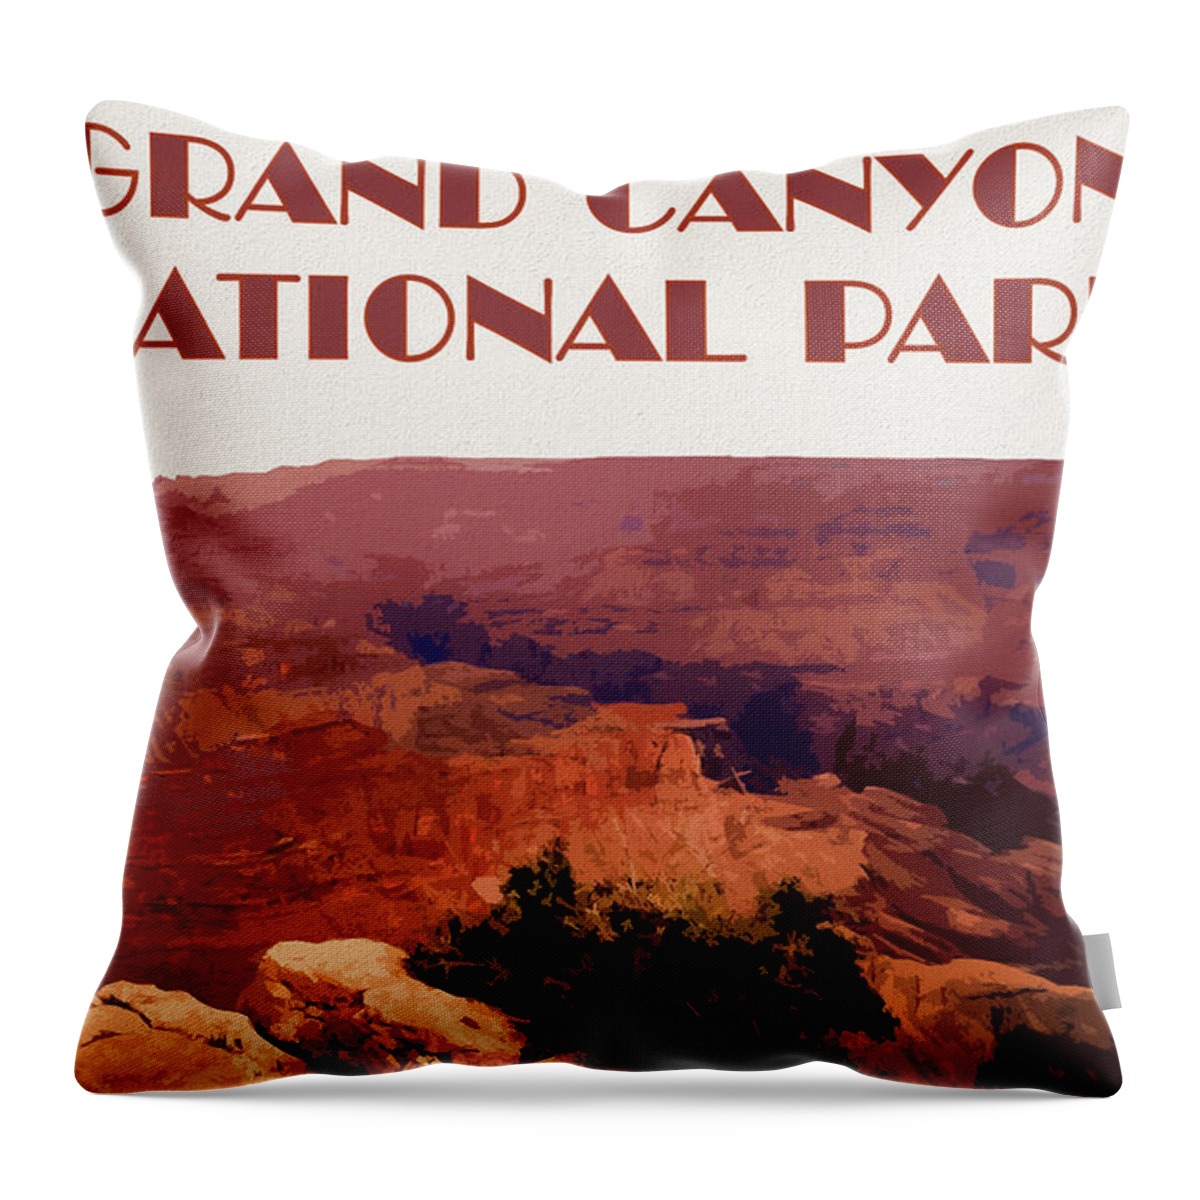 Grand Canyon National Park Throw Pillow featuring the mixed media Grand Canyon National Park Poster Style by Dan Sproul